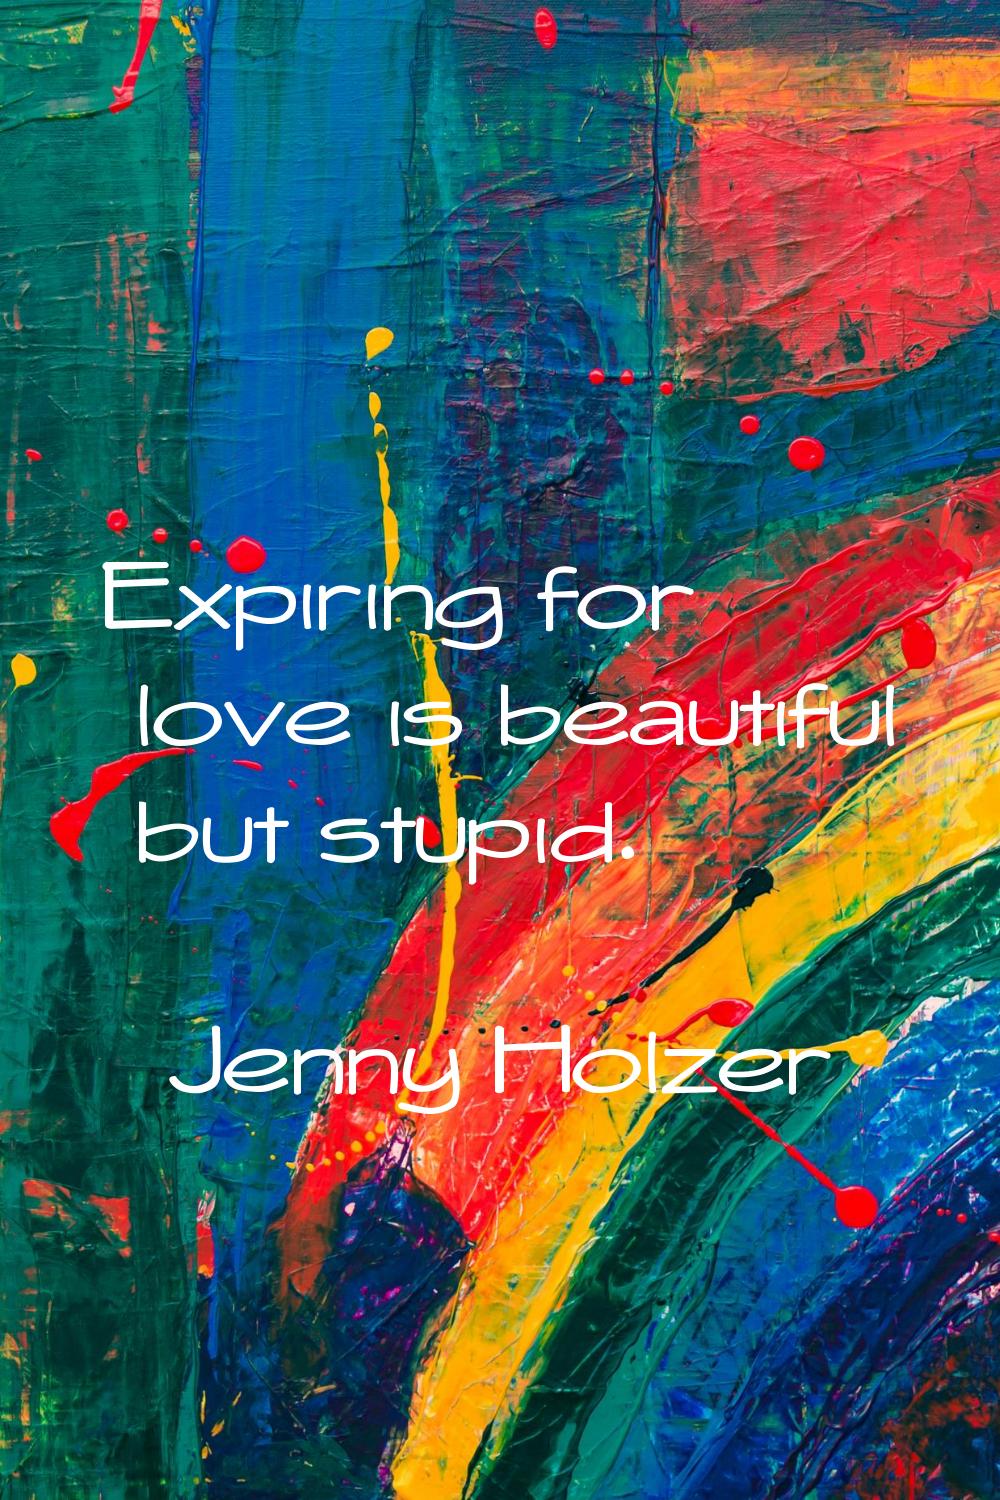 Expiring for love is beautiful but stupid.